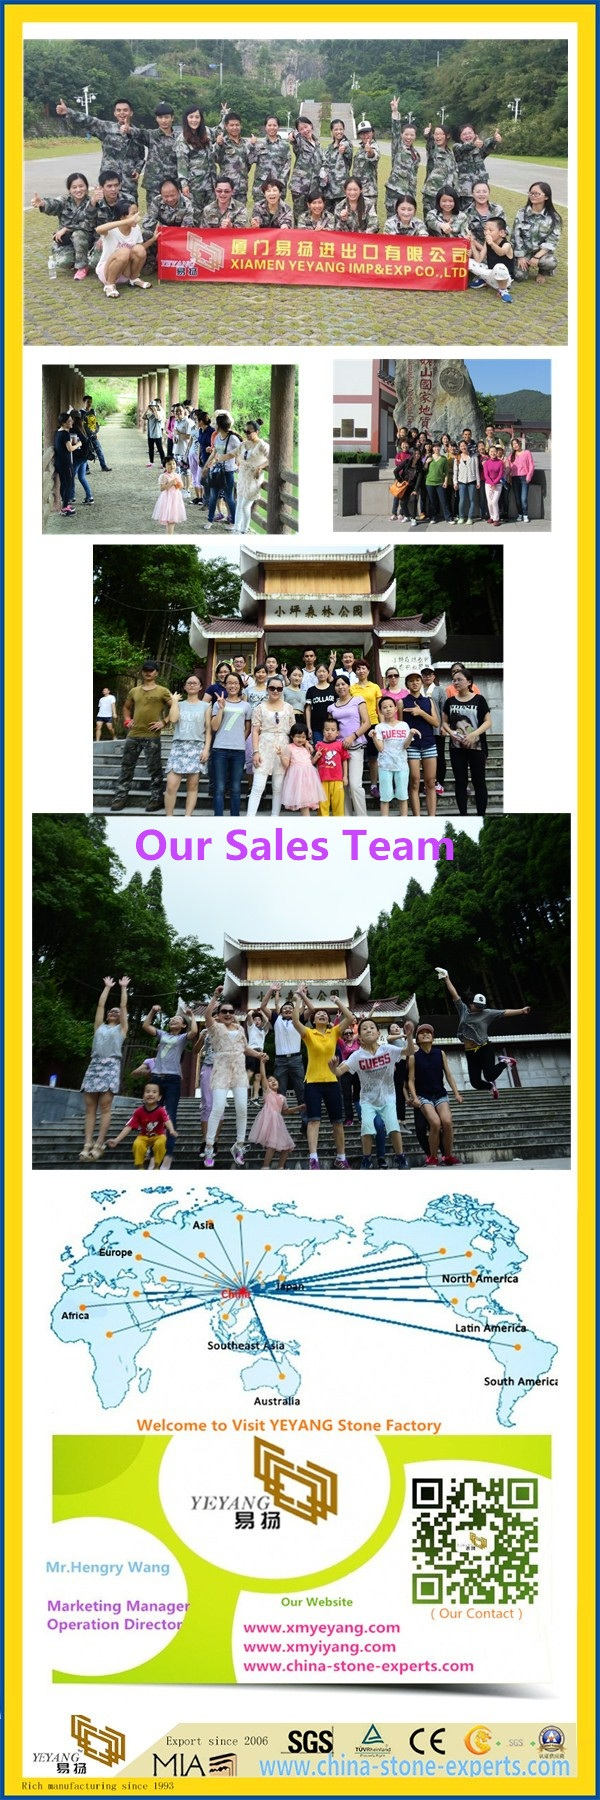 03 Our Sales Team _副本